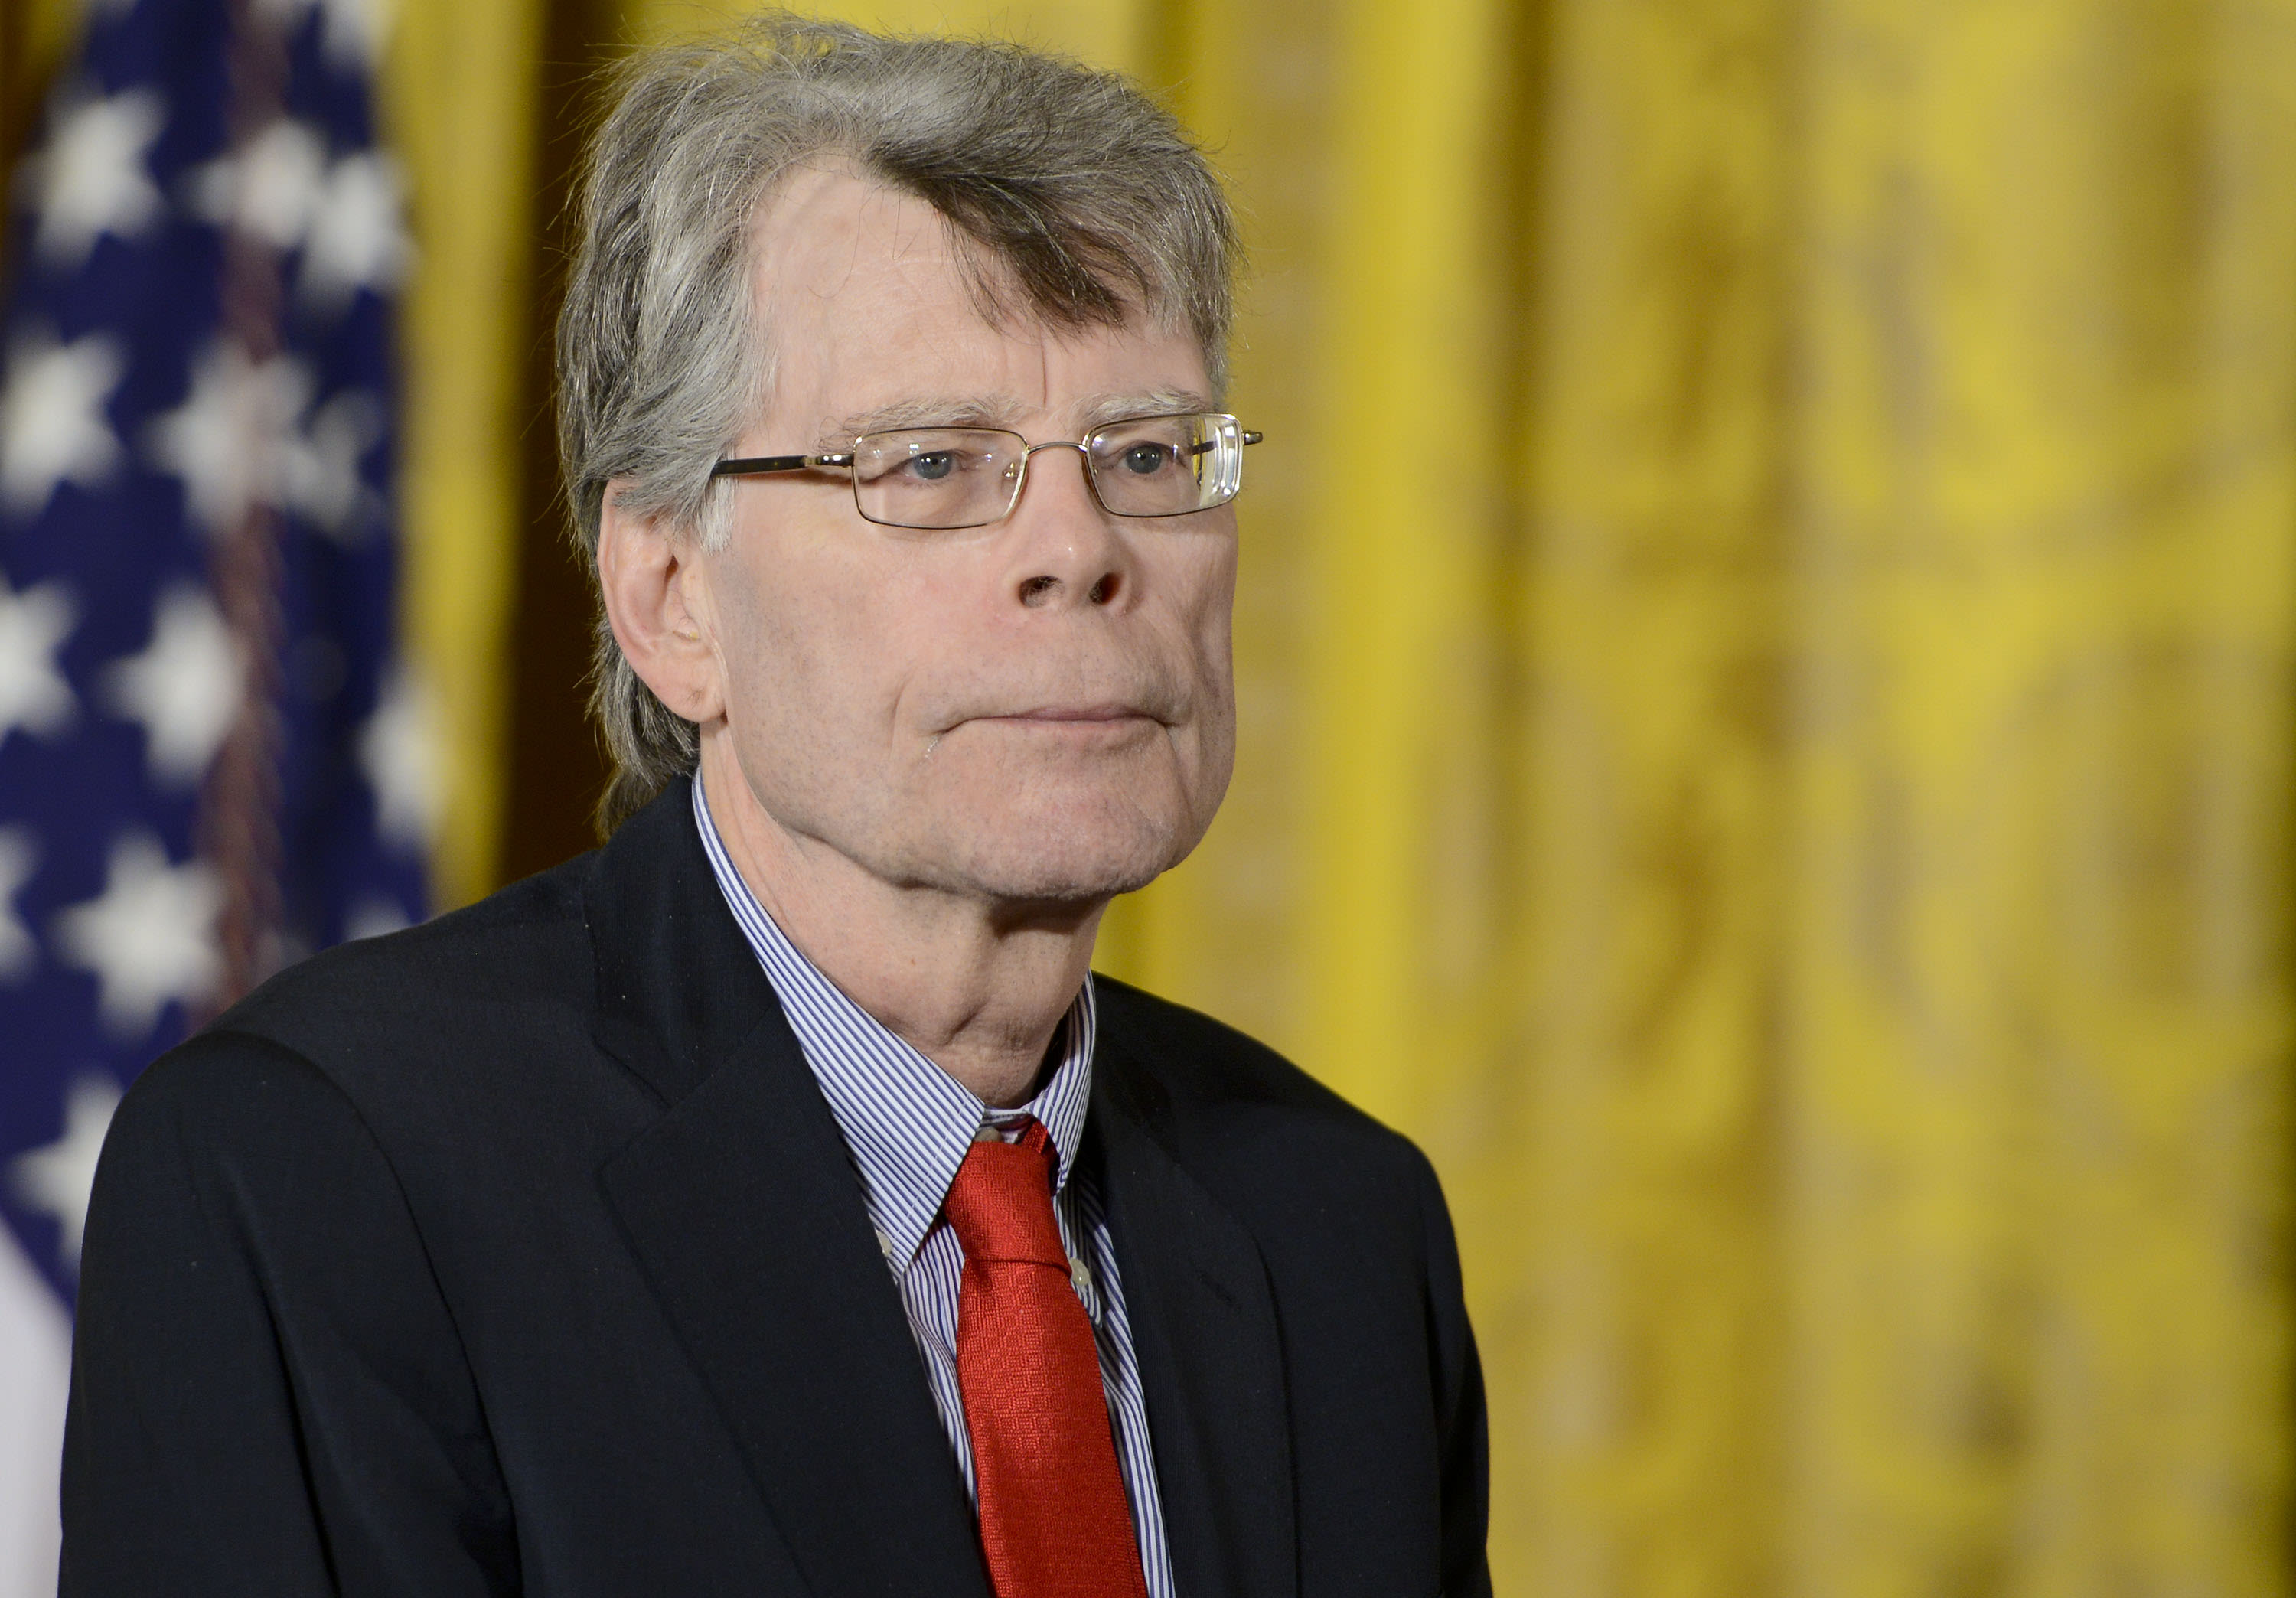 Stephen King asks Republicans to "hold your nose" and vote Kamala Harris